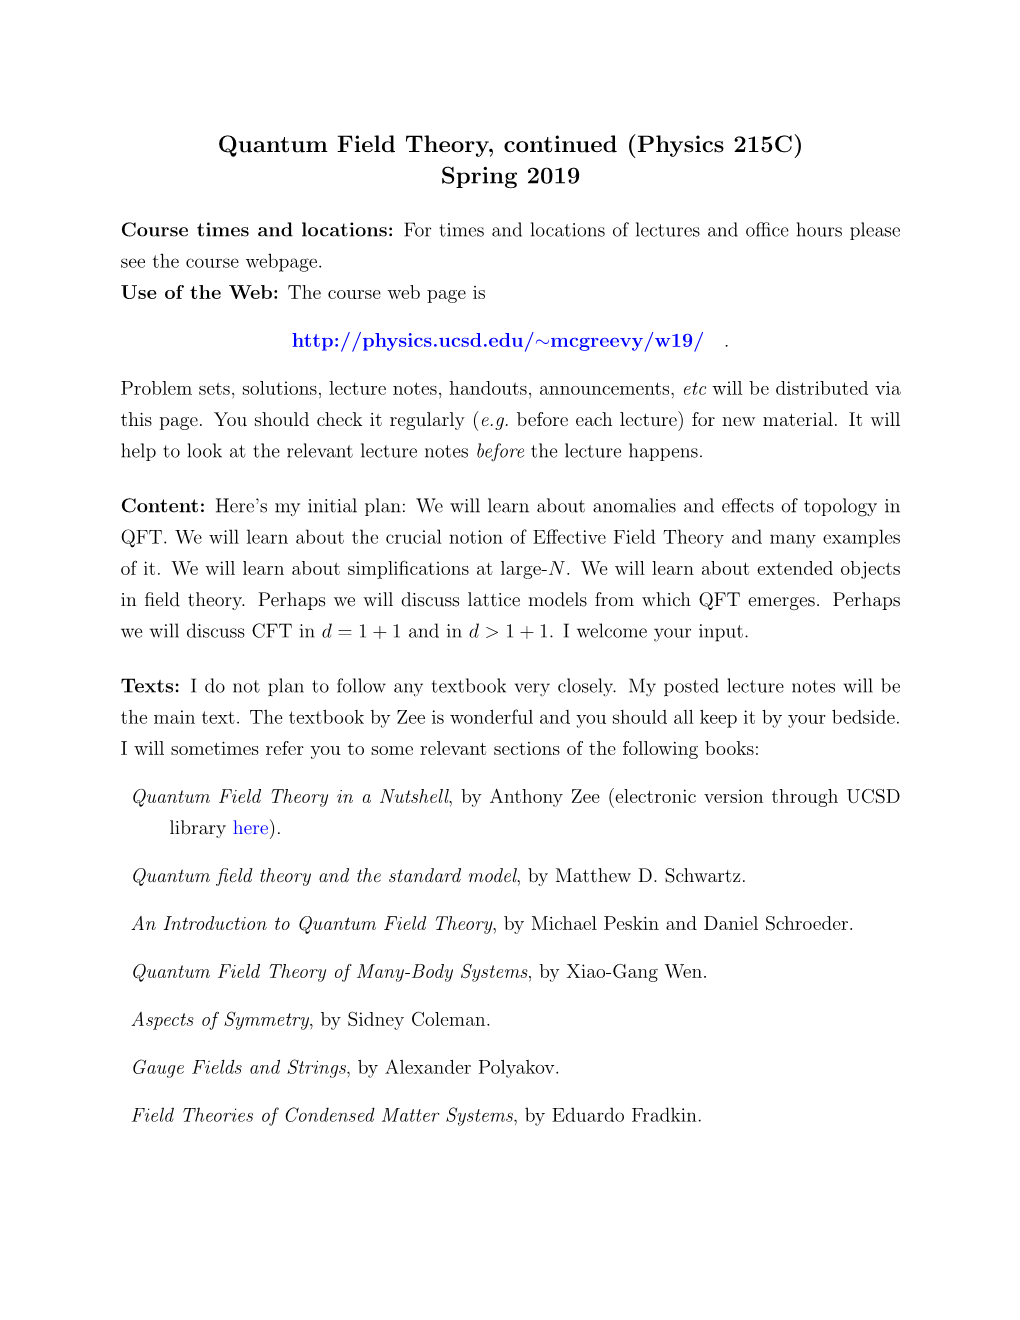 Quantum Field Theory, Continued (Physics 215C) Spring 2019